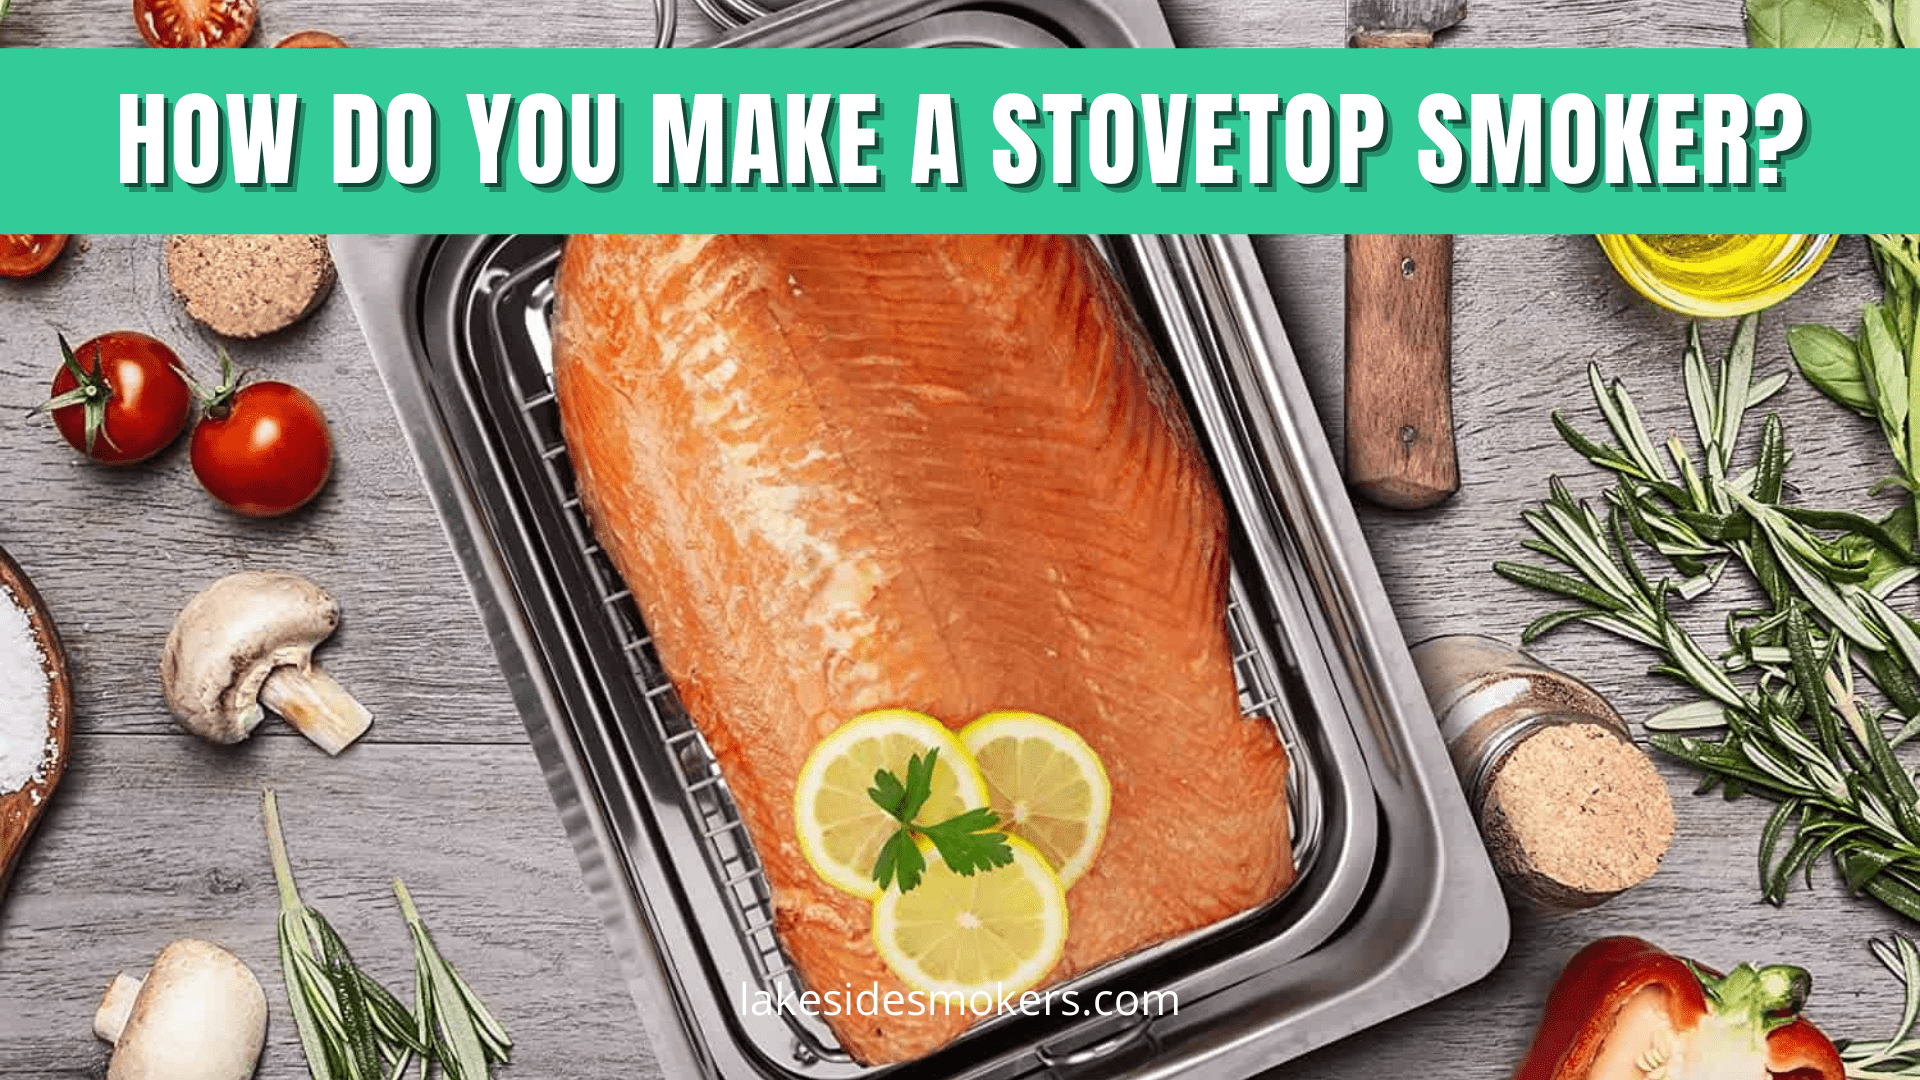 How do you make a stovetop smoker? Step-by-step instructions